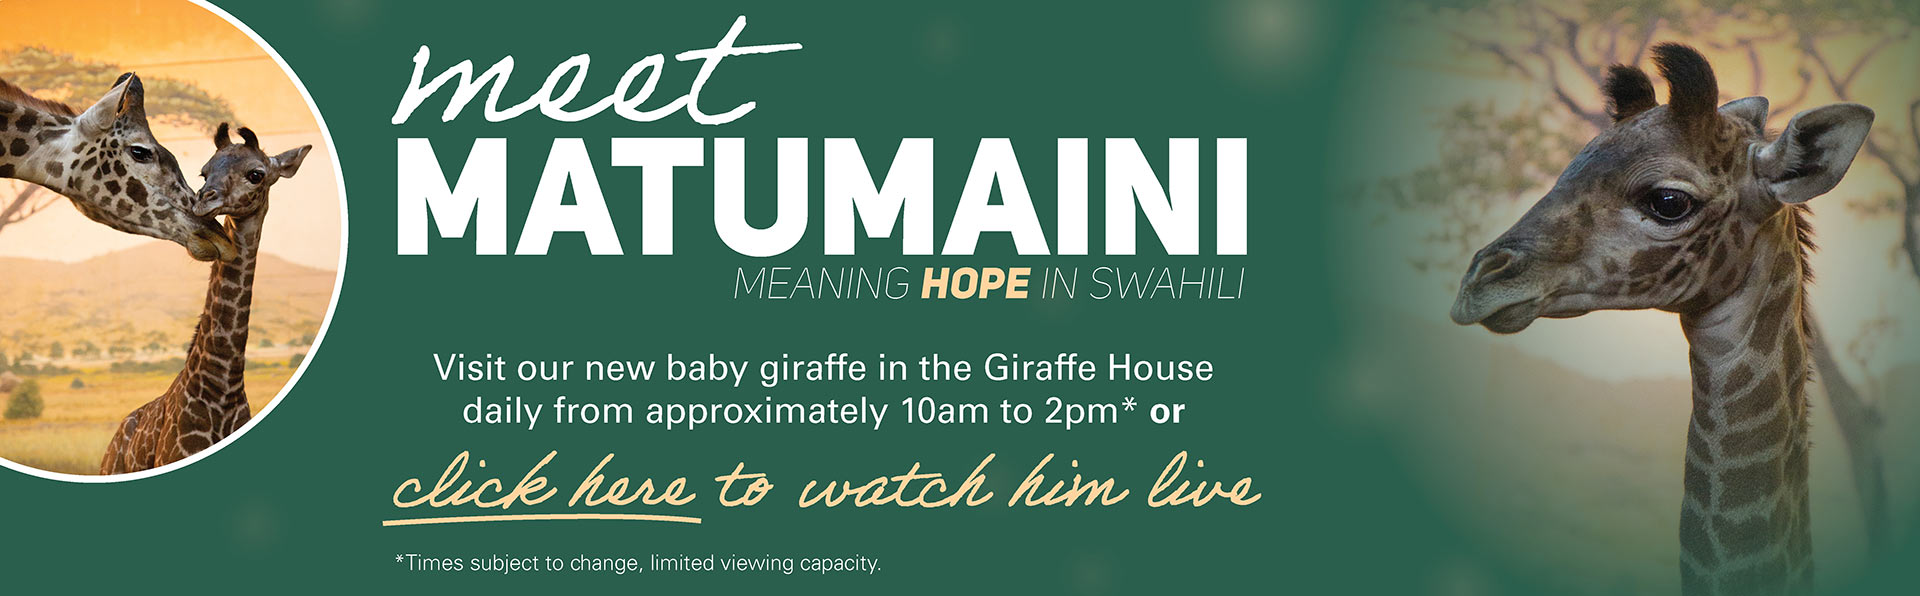 Meet Matumaini - Meaning Hope in Swahili - Visit our new baby giraffe in the Giraffe House daily from approximately 10am to 2pm* or